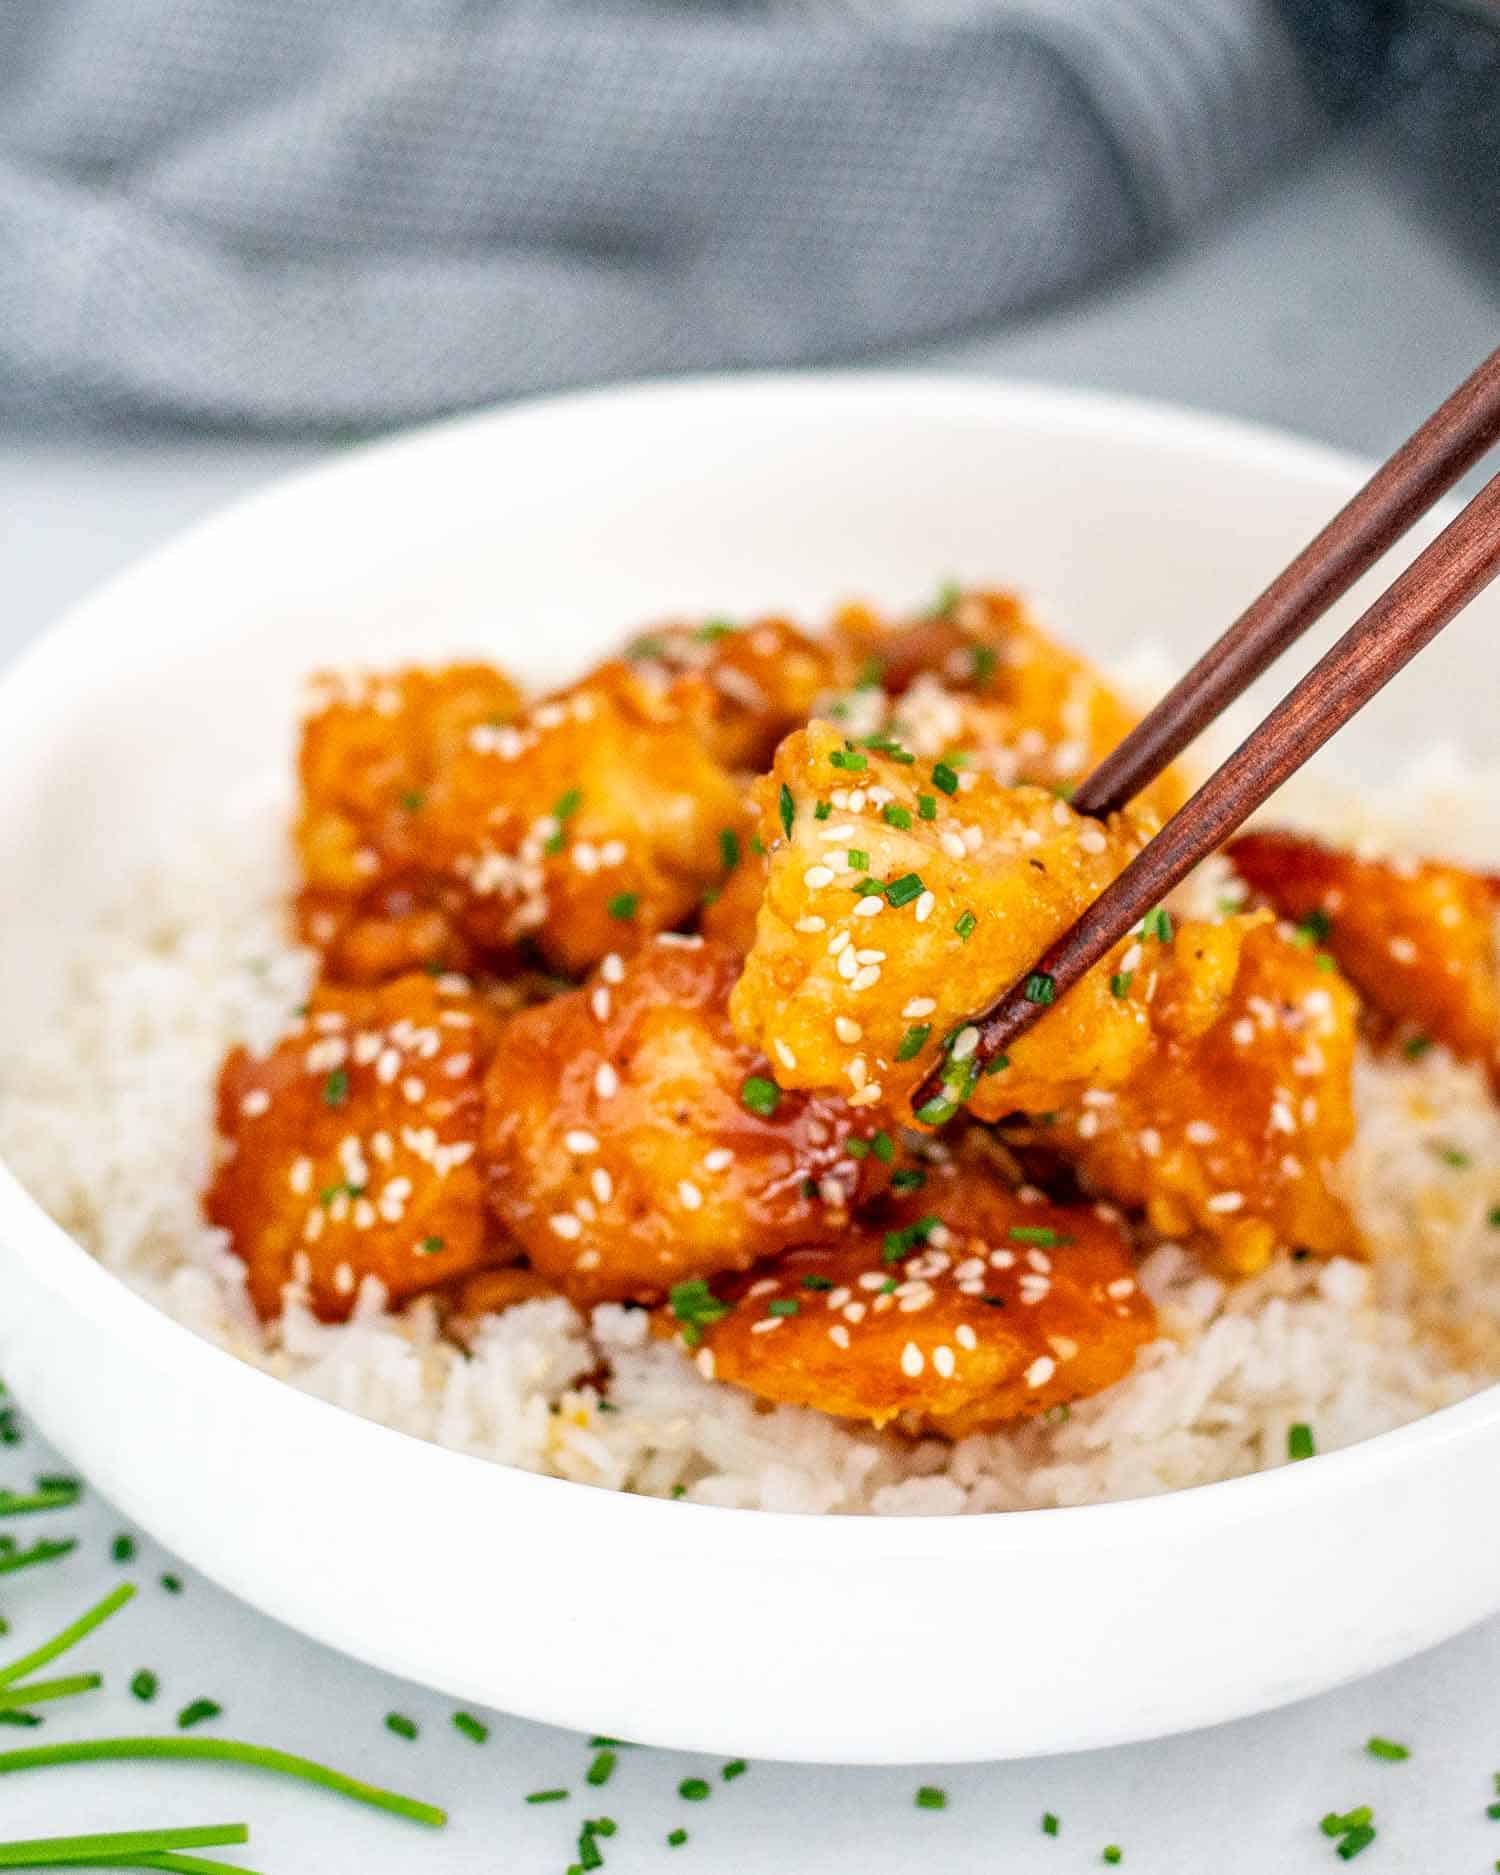 orange chicken on a bed of rice garnished with chives in a white bowl.